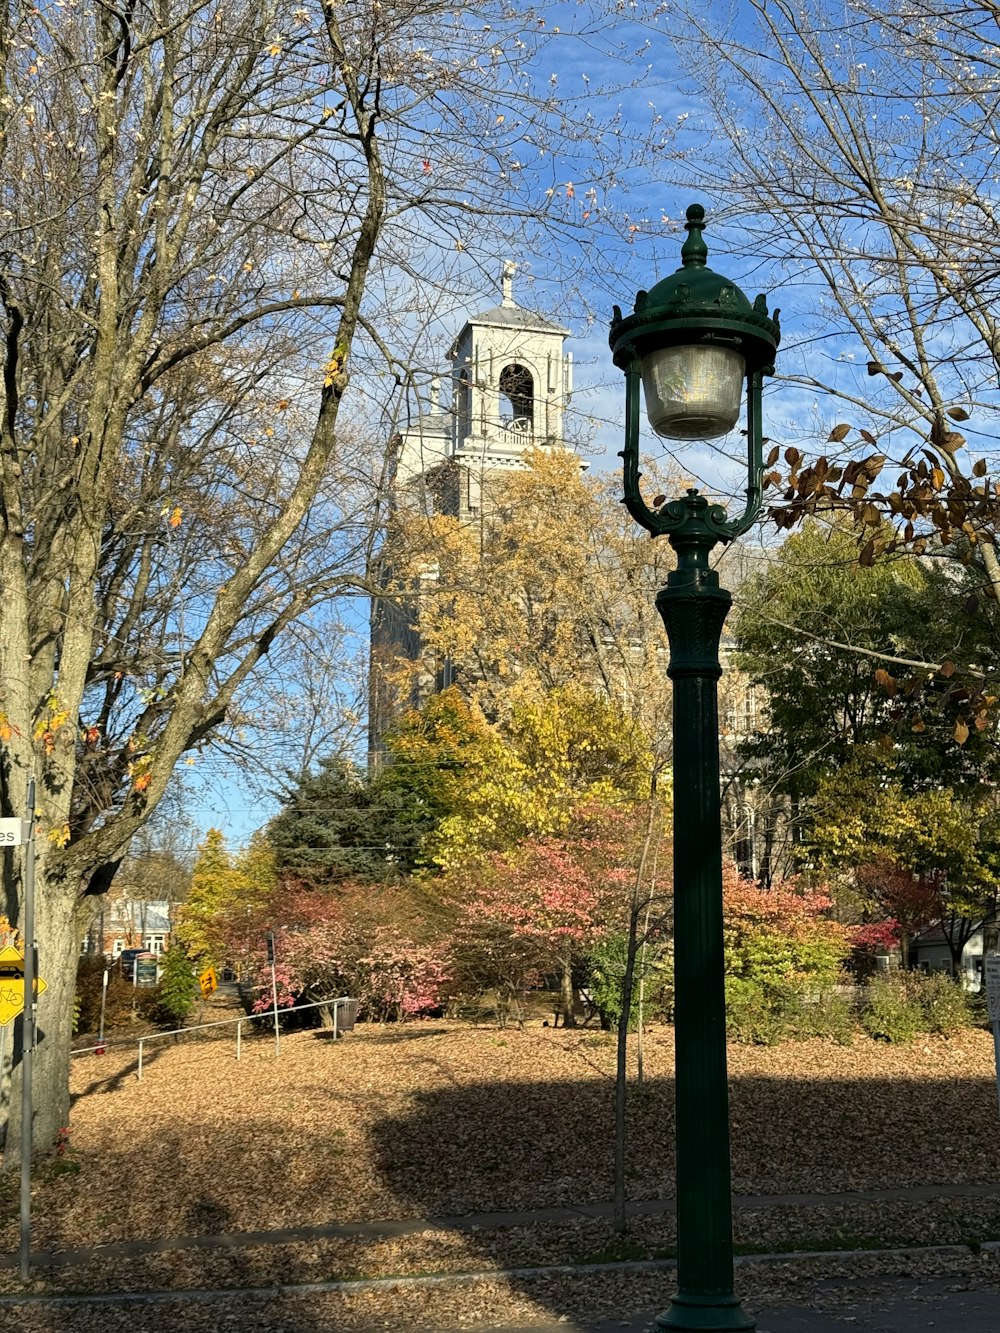 a lamp post in a park with a clock tower in the background